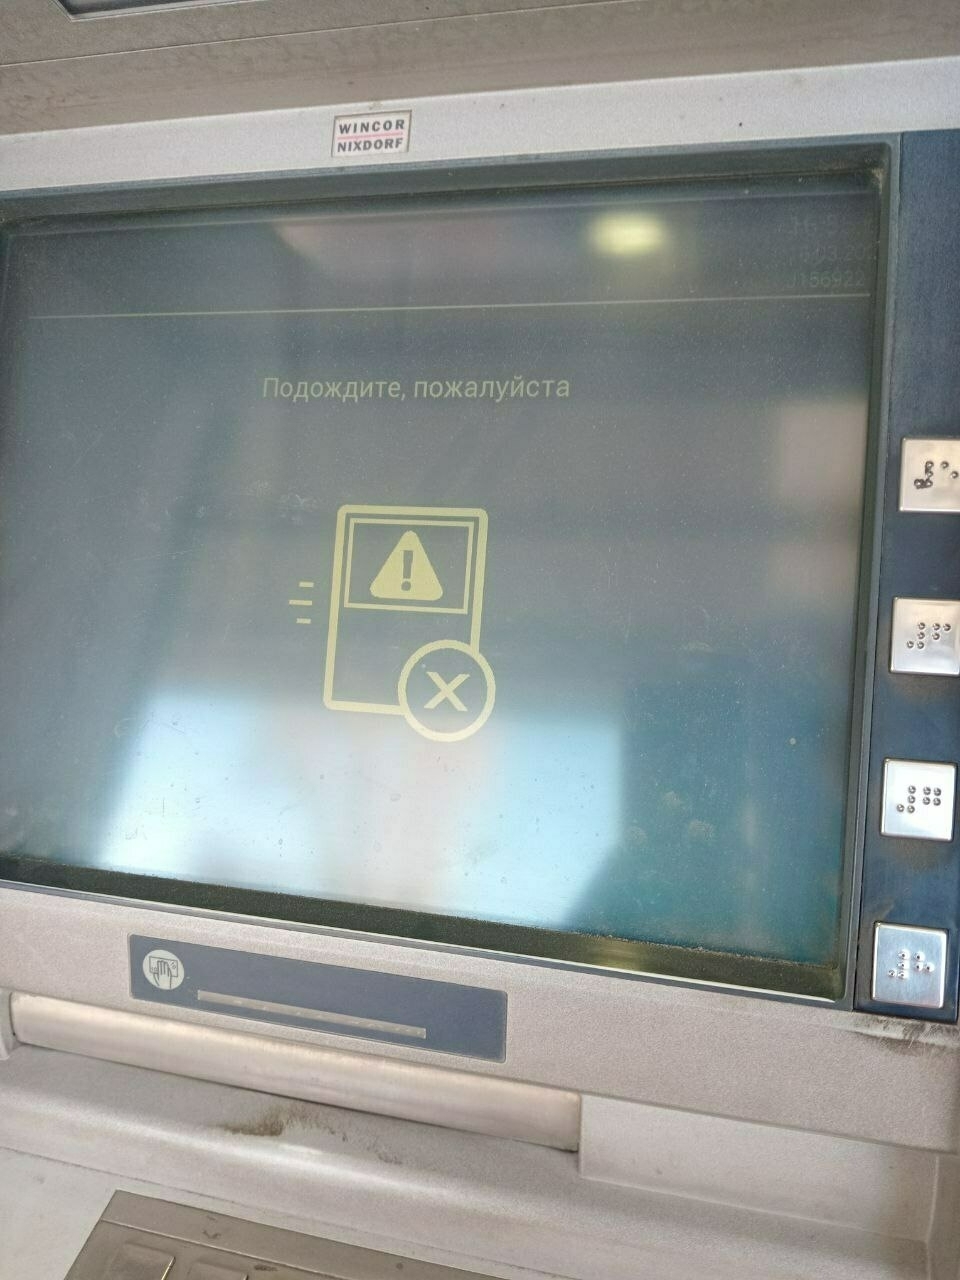 ATM showing what looks like an error graphic with the words "подождите, пожалуйста" ('wait, please' in Russian)